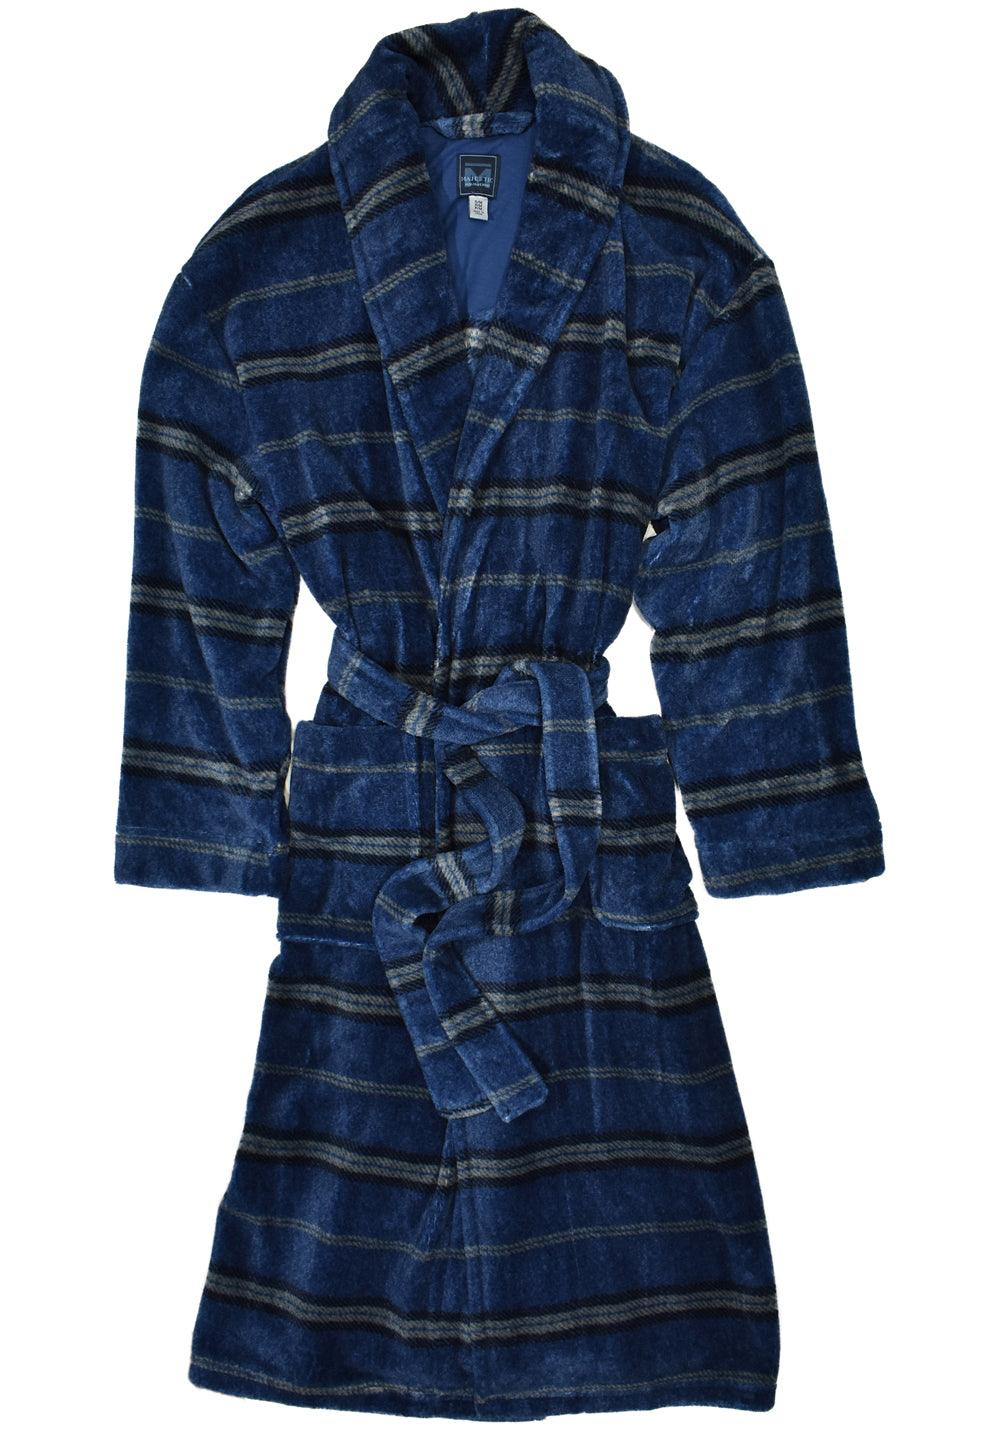 Wrap yourself in this plush robe and you’ll never want to take it off. Super soft and comfy it is an ideal gift for him or her!   Traditional yet updated fashion plaid pattern.  Indigo Plaid Plush Robe  Plush microfiber is super soft and easy care. Medium weight. Tie belt front. Classic front patch pockets. Small/Medium or Large/X-Large.